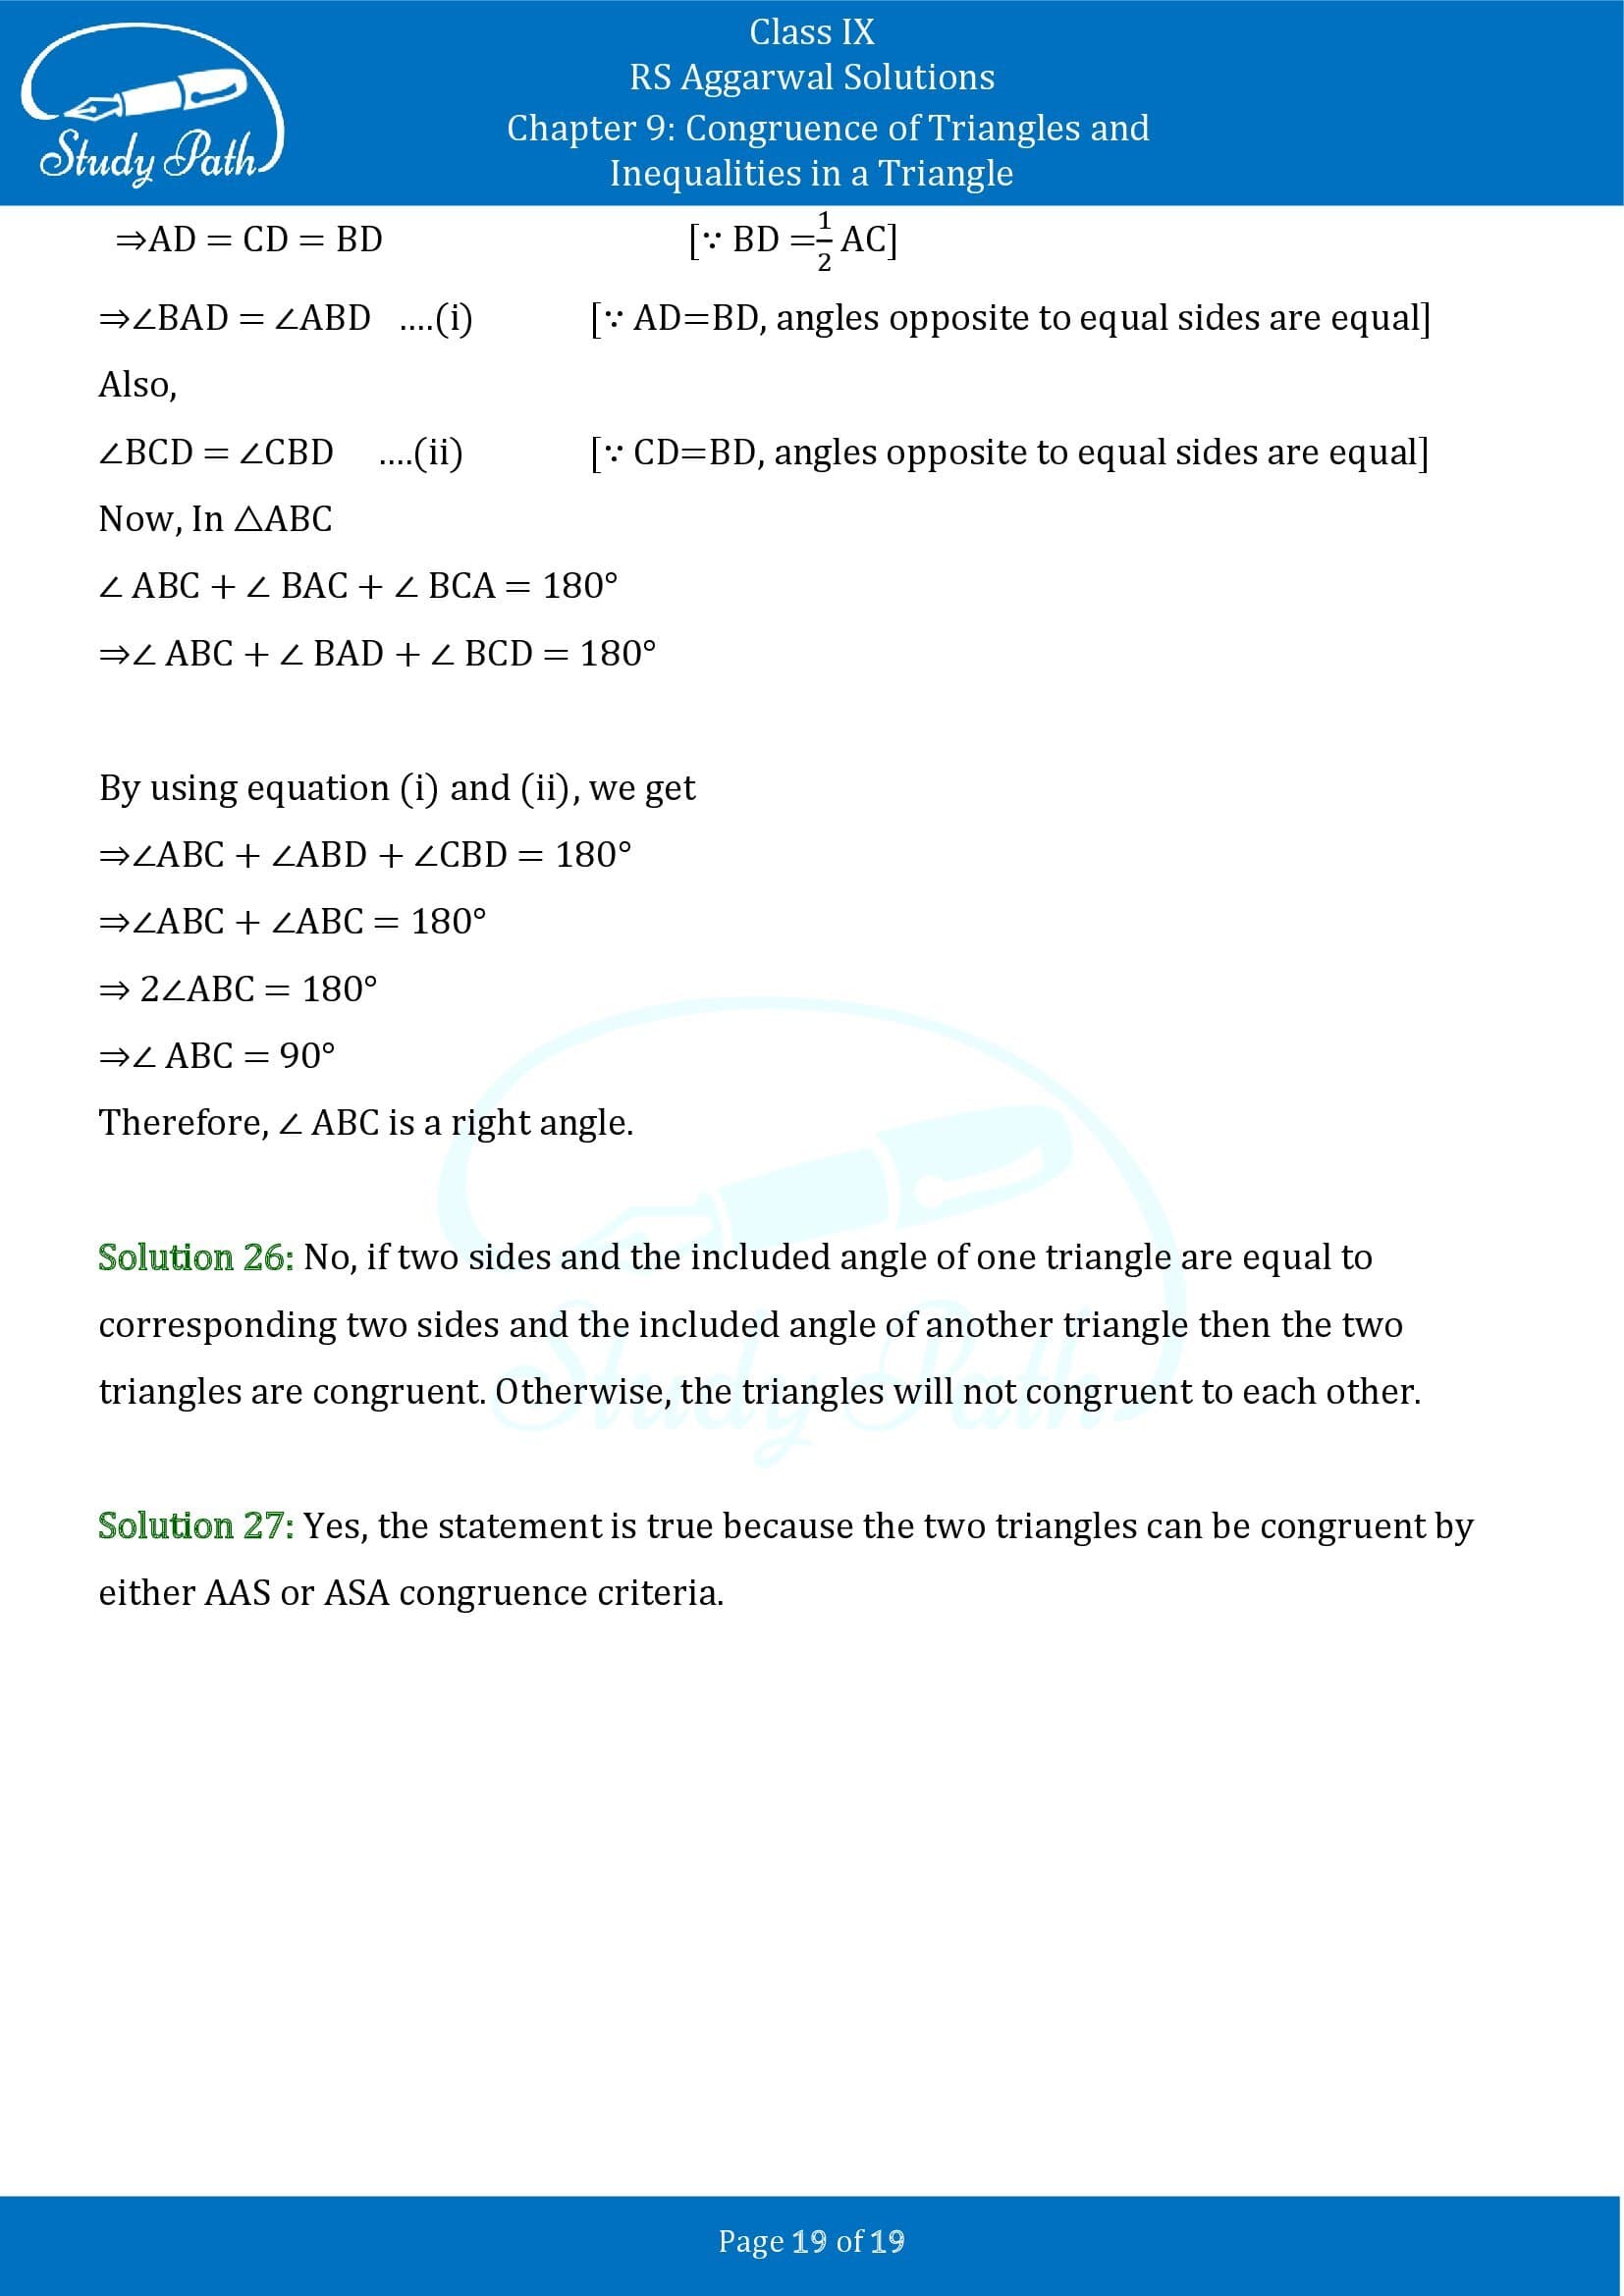 RS Aggarwal Solutions Class 9 Chapter 9 Congruence of Triangles and Inequalities in a Triangle Exercise 9A 0019